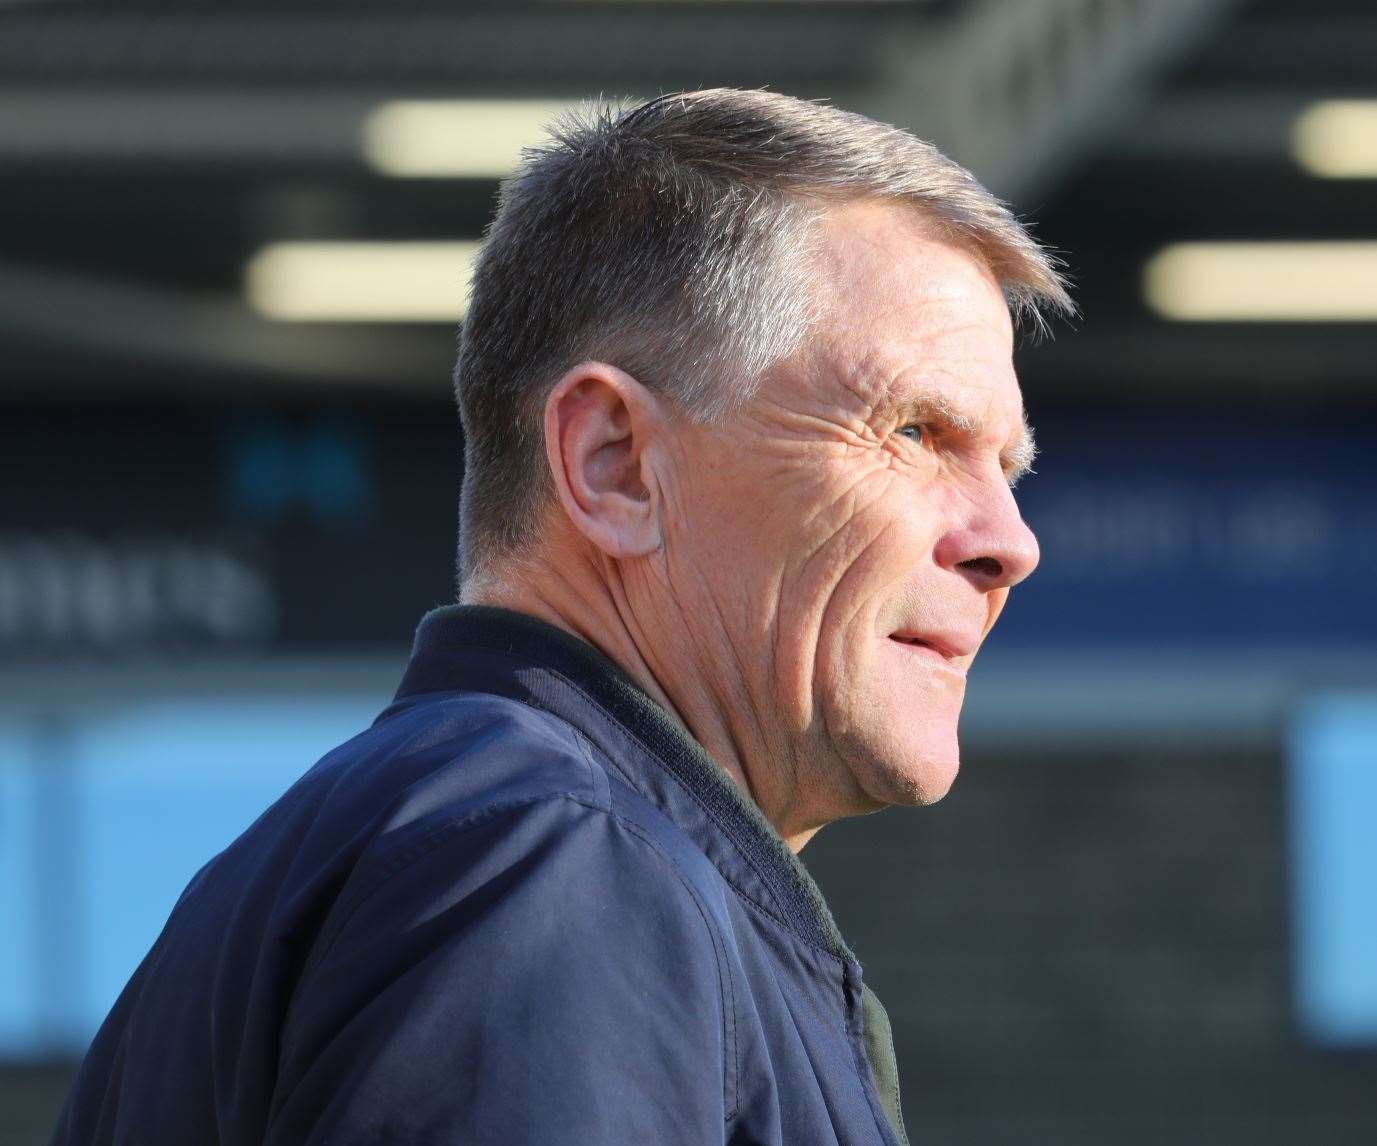 Dover boss Andy Hessenthaler has come to Tonbridge's aid in the loan market